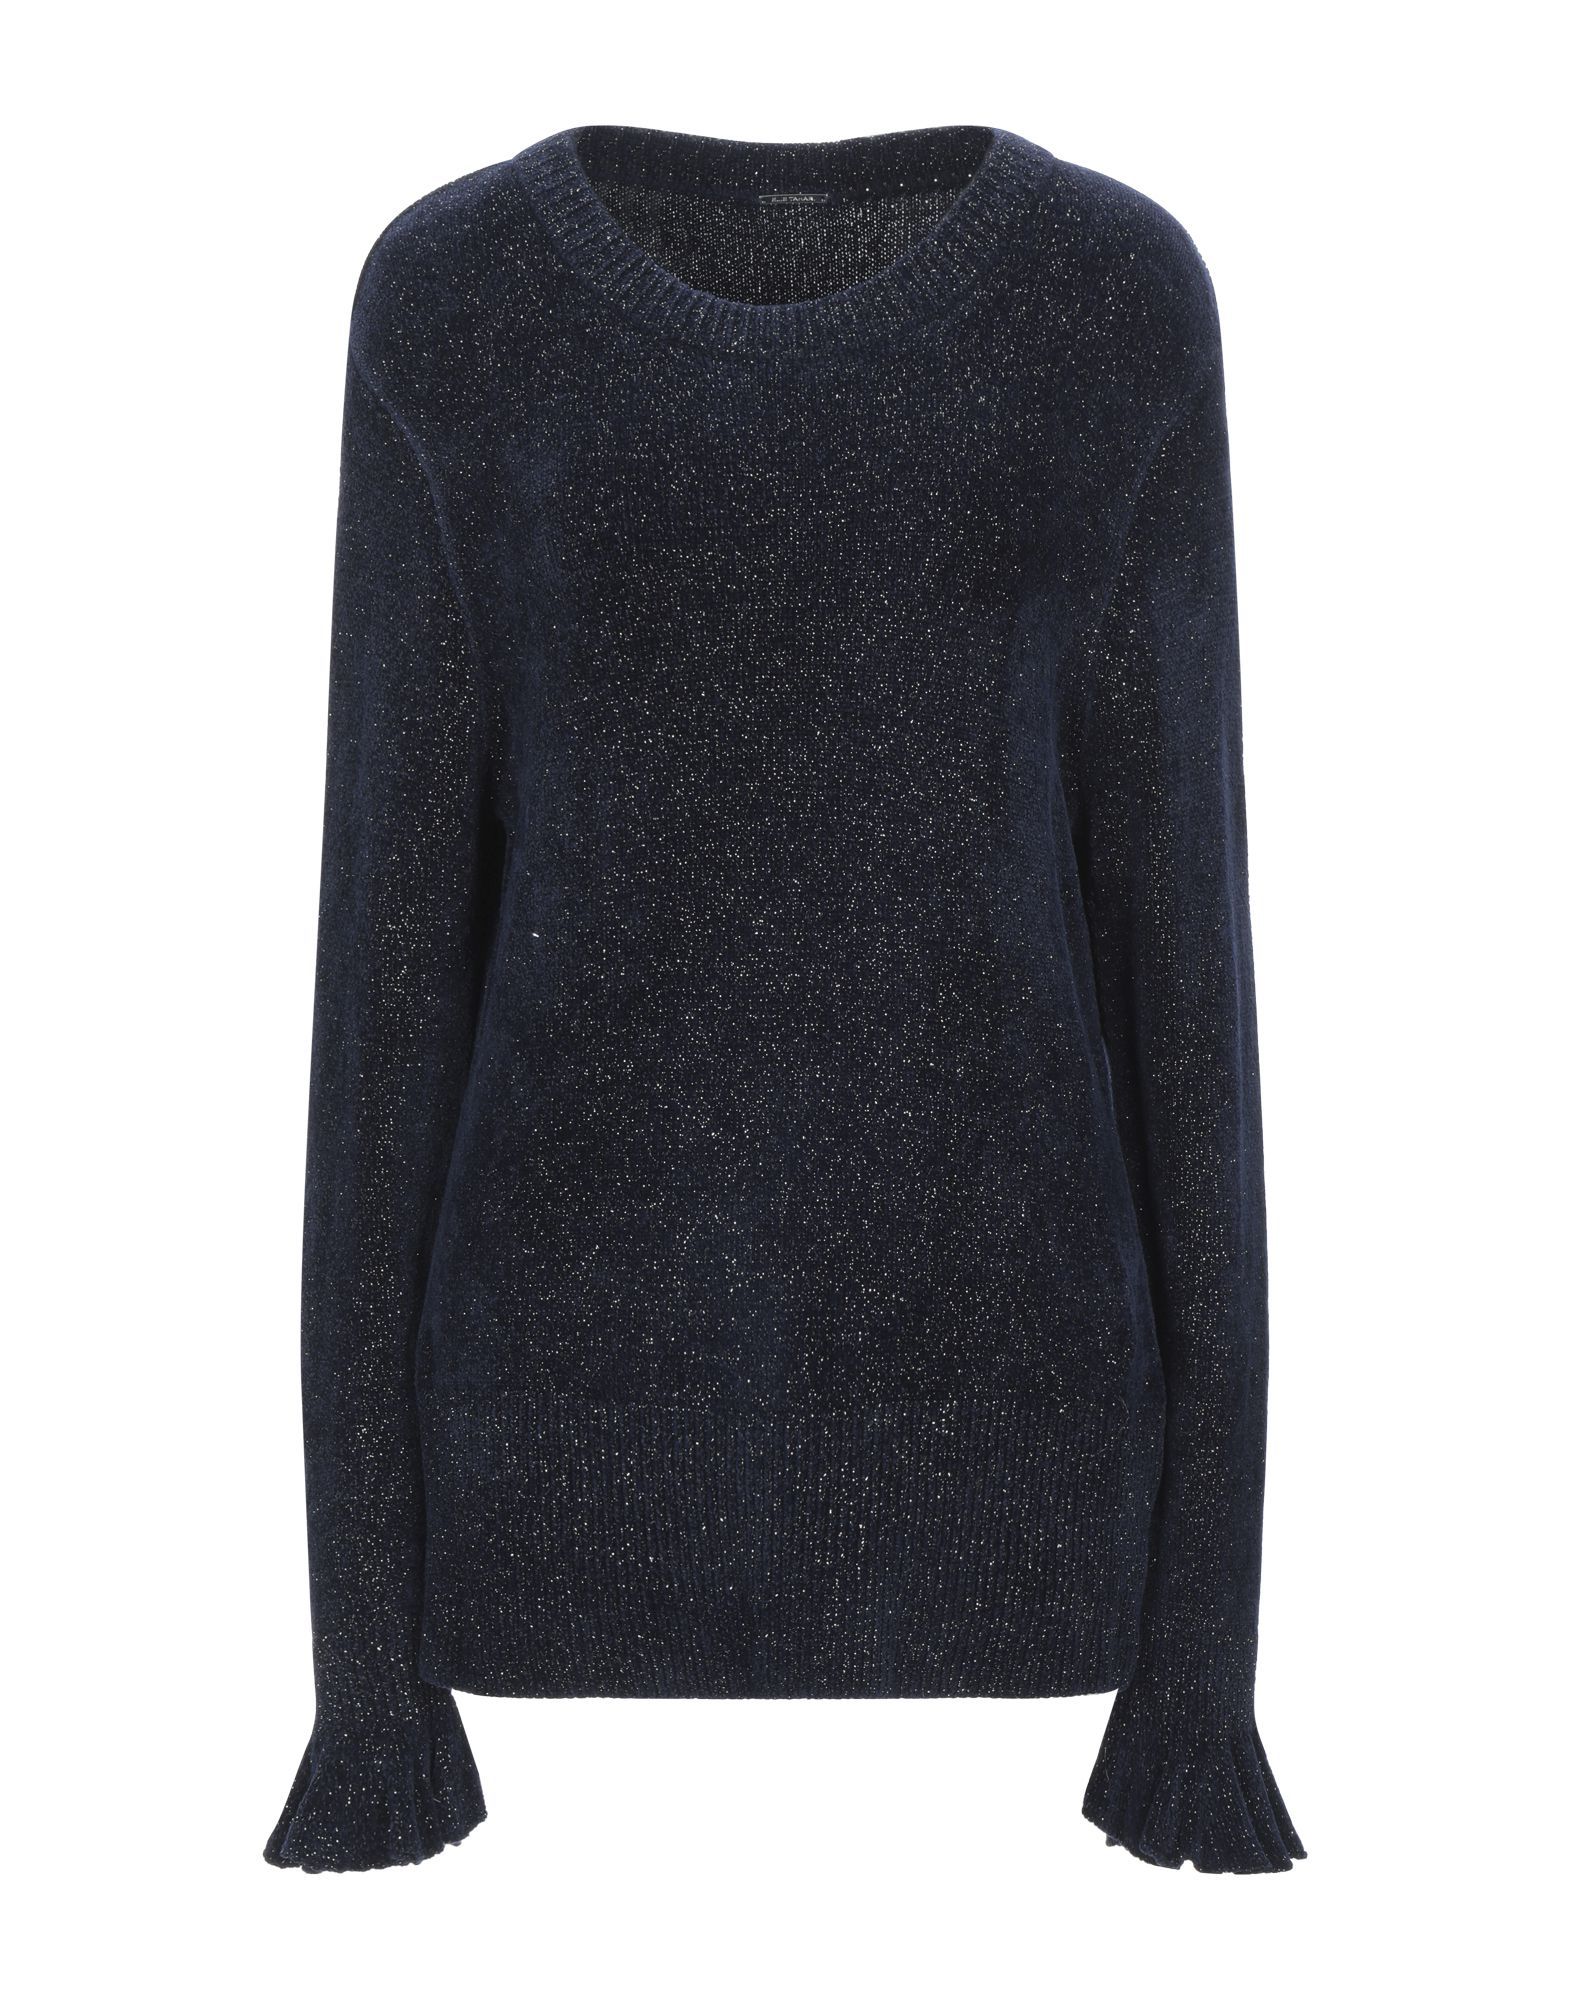 knitted, lamé, no appliqués, solid colour, mélange, round collar, medium-weight knitted, long sleeves, no pockets